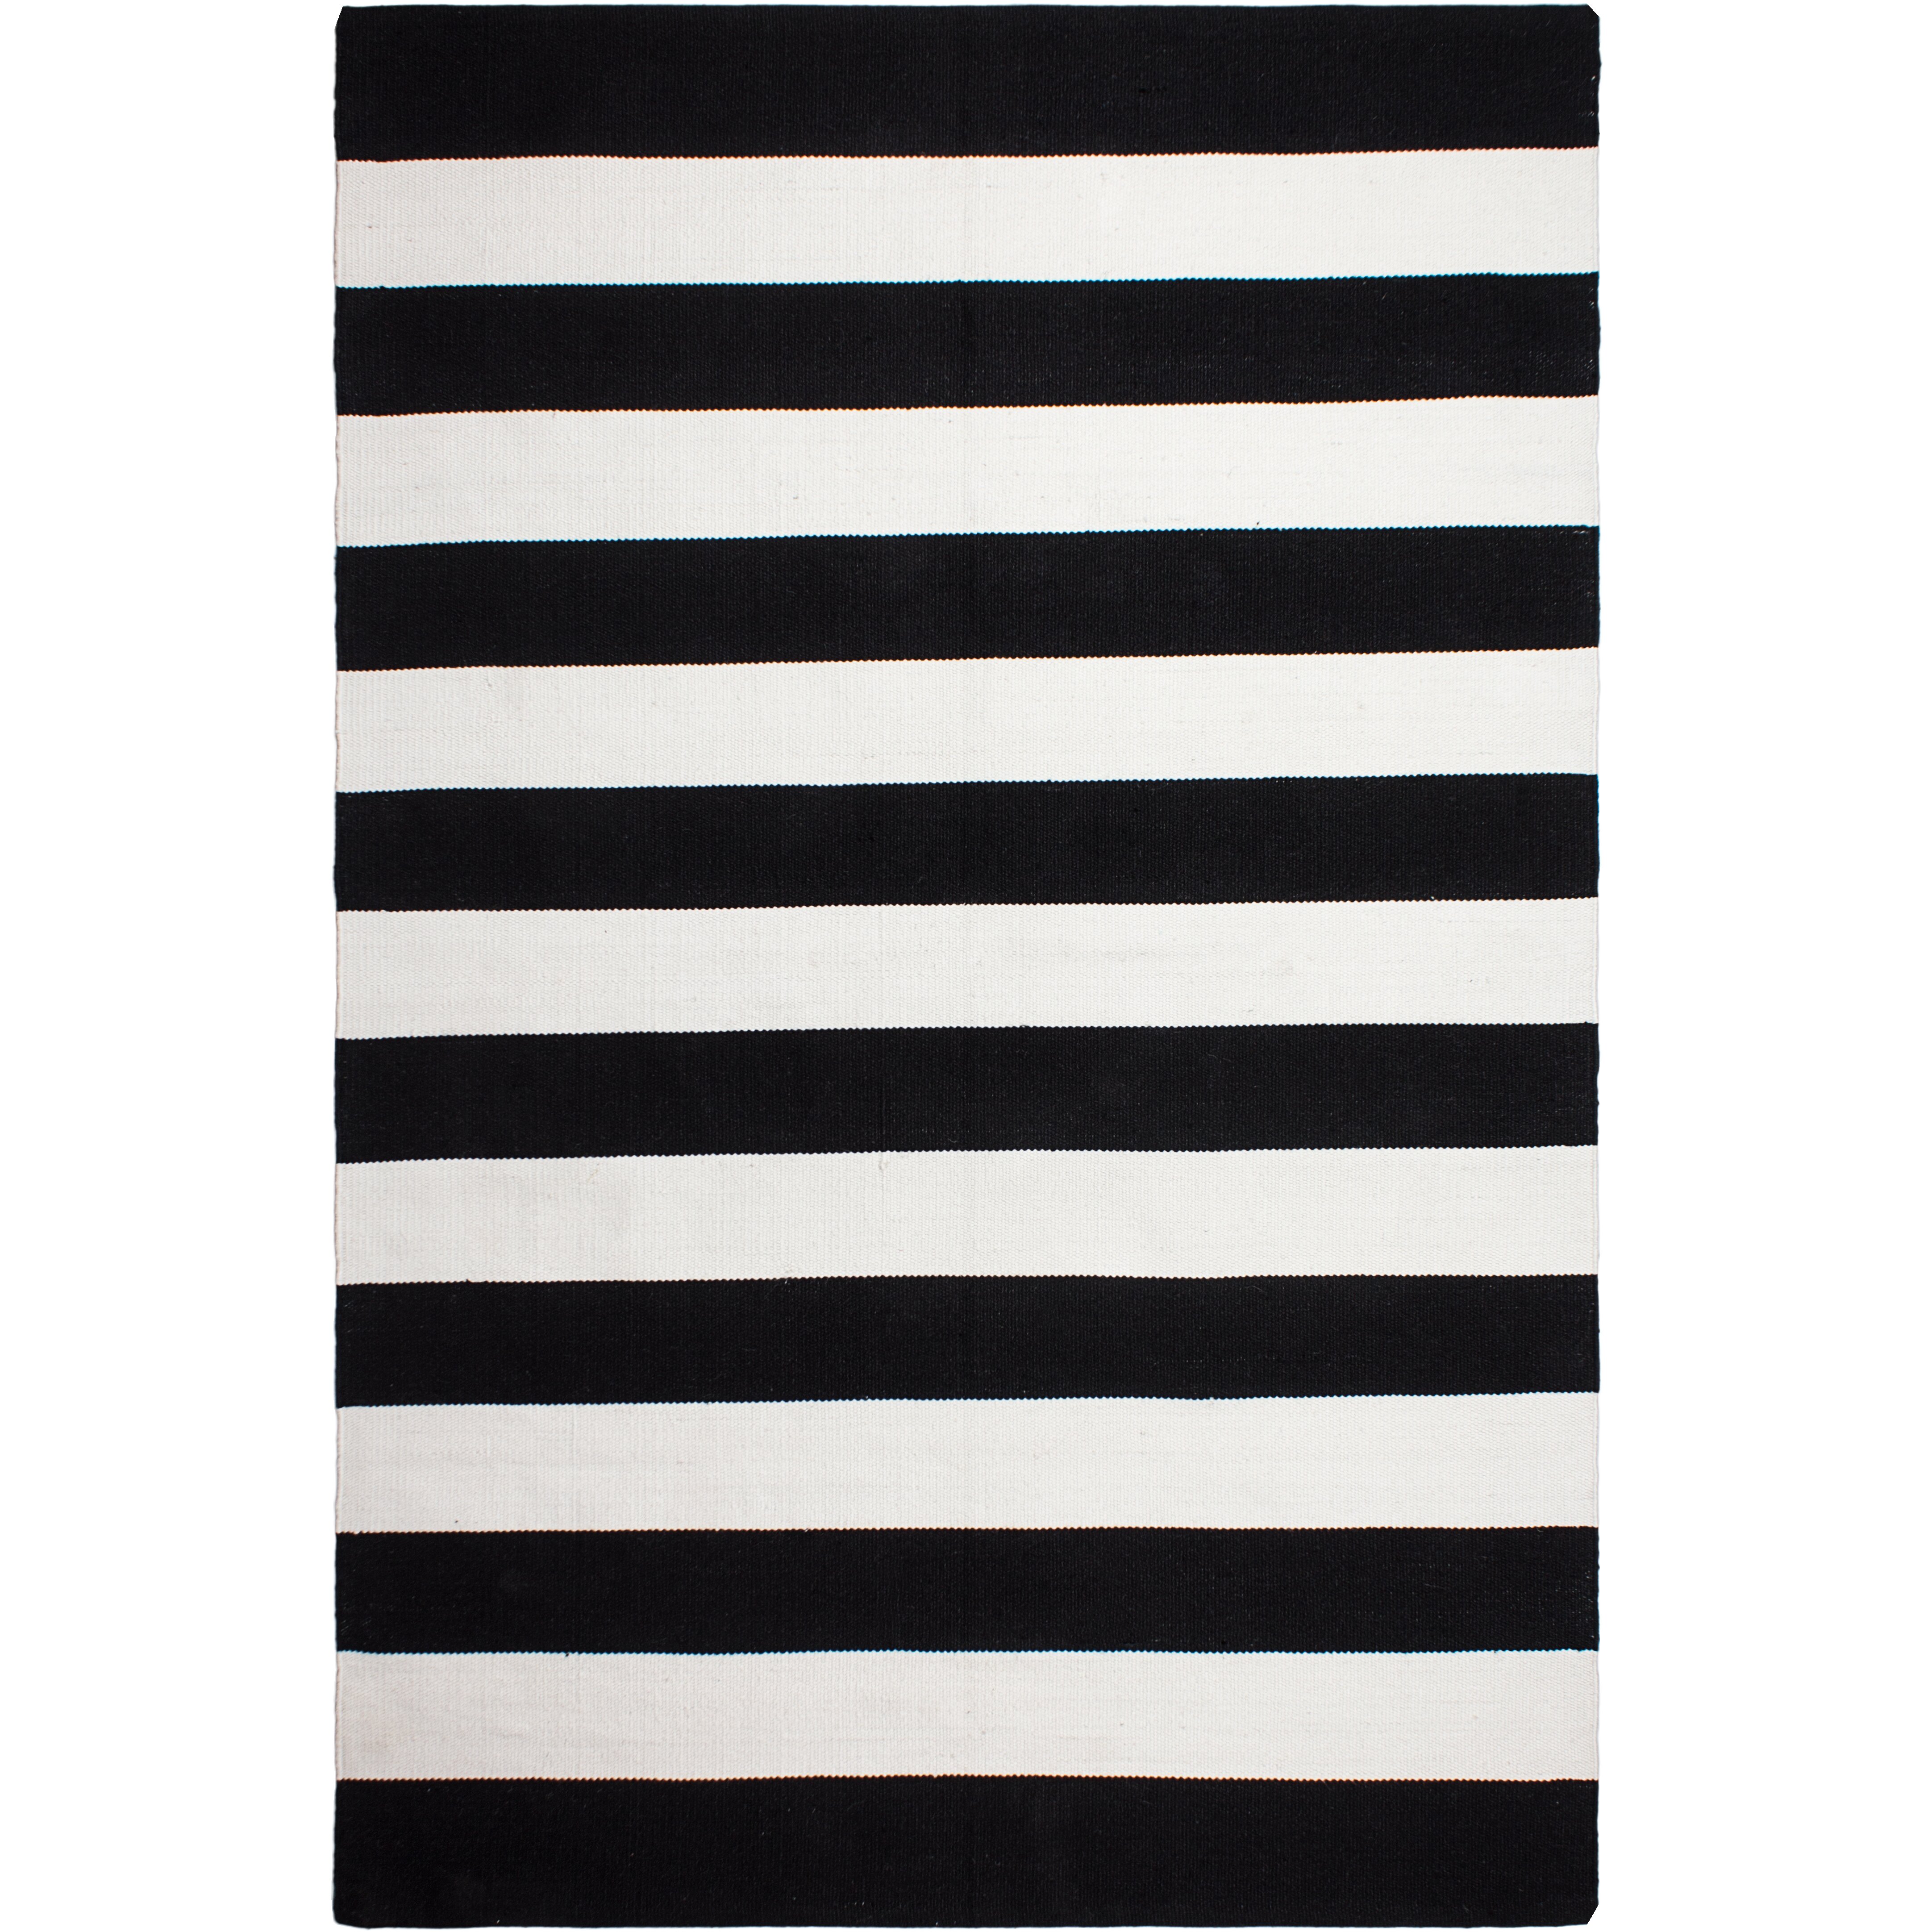 Fab Rugs Nantucket Striped Black/White Indoor/Outdoor Area